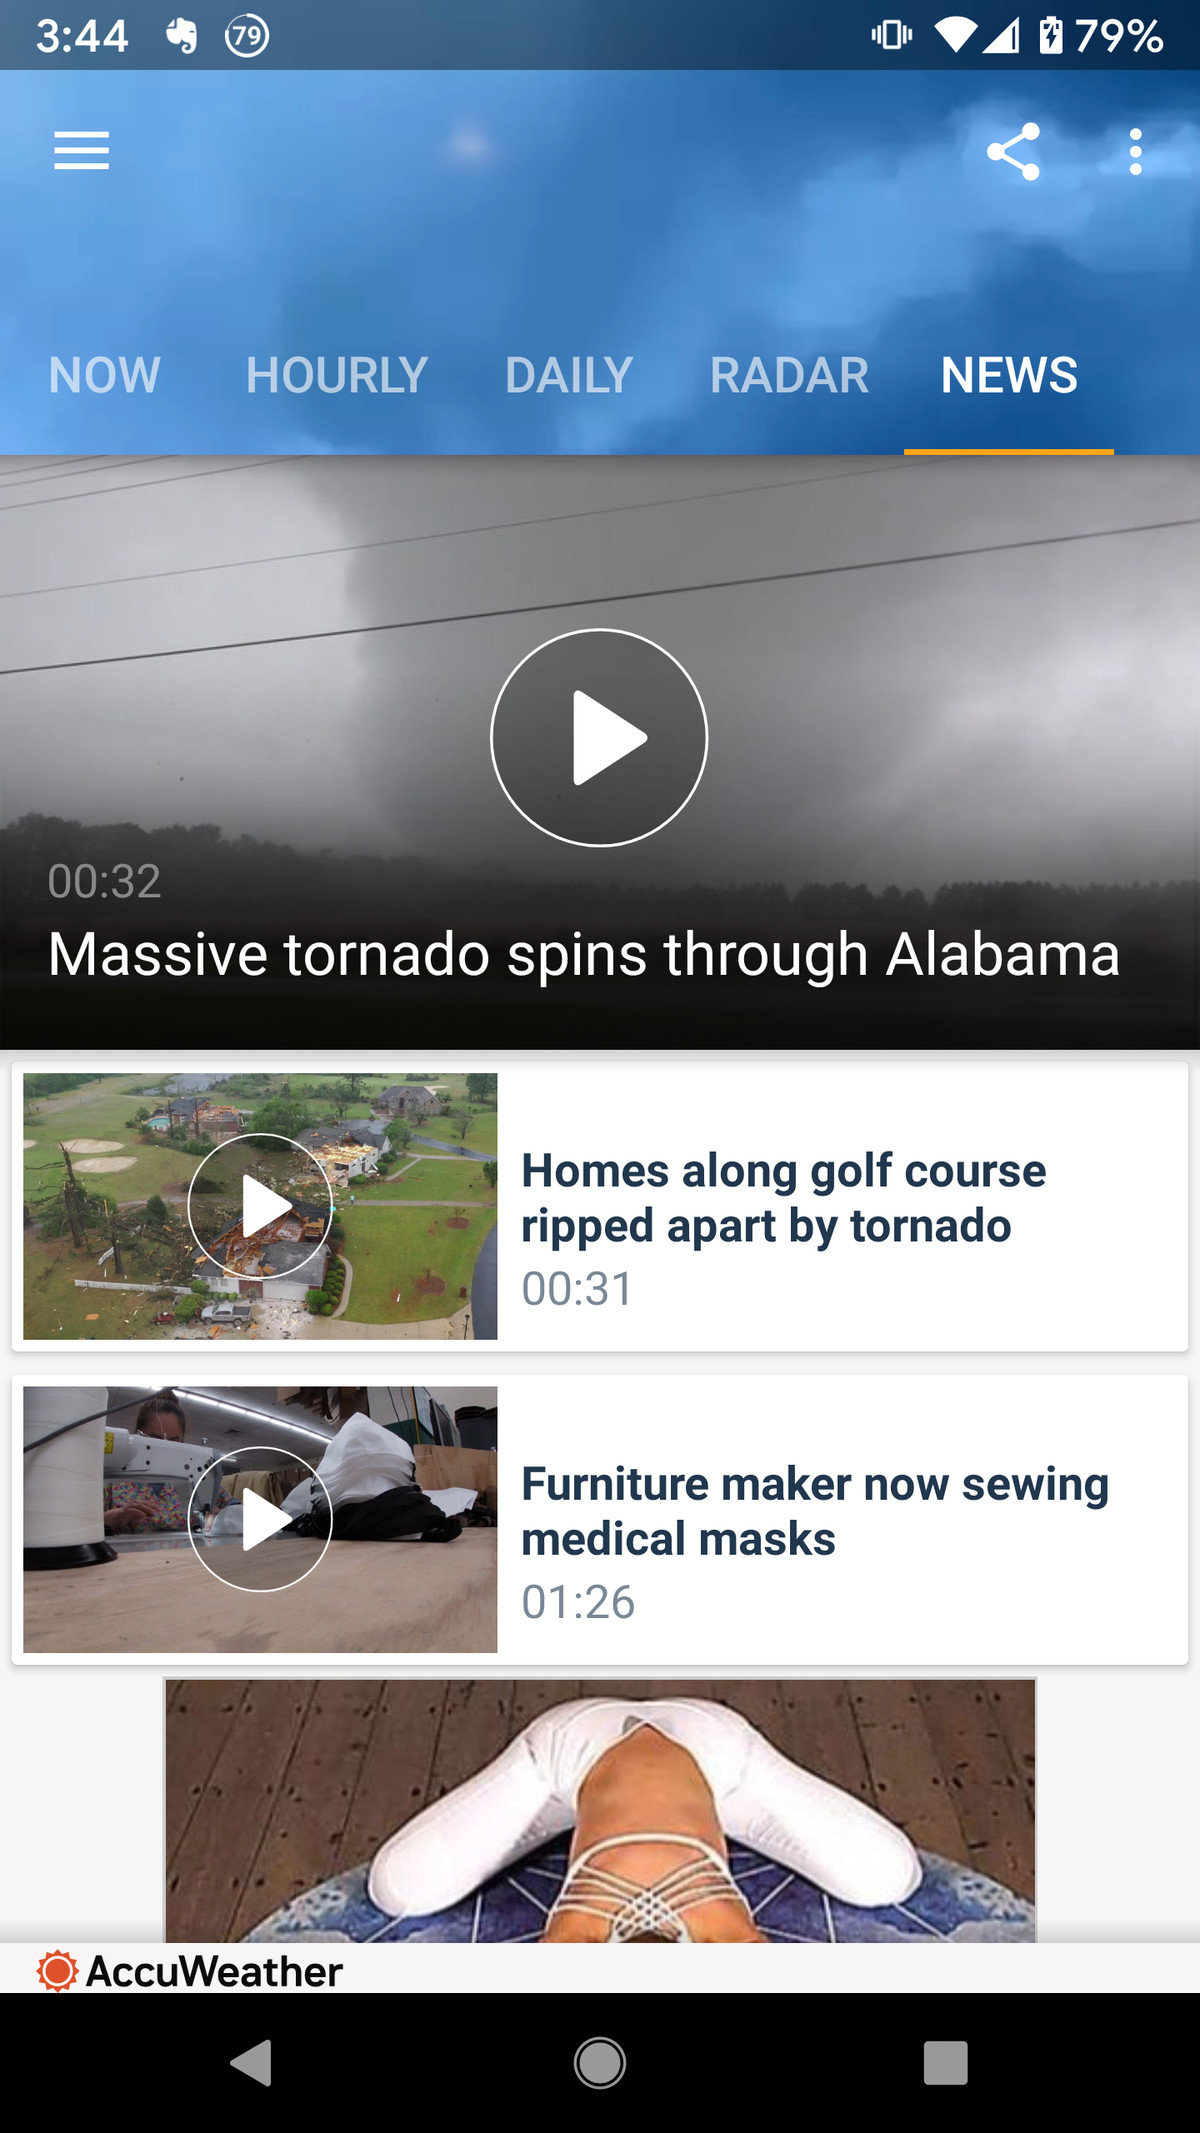 A news section offers videos on the latest weather-related disasters.